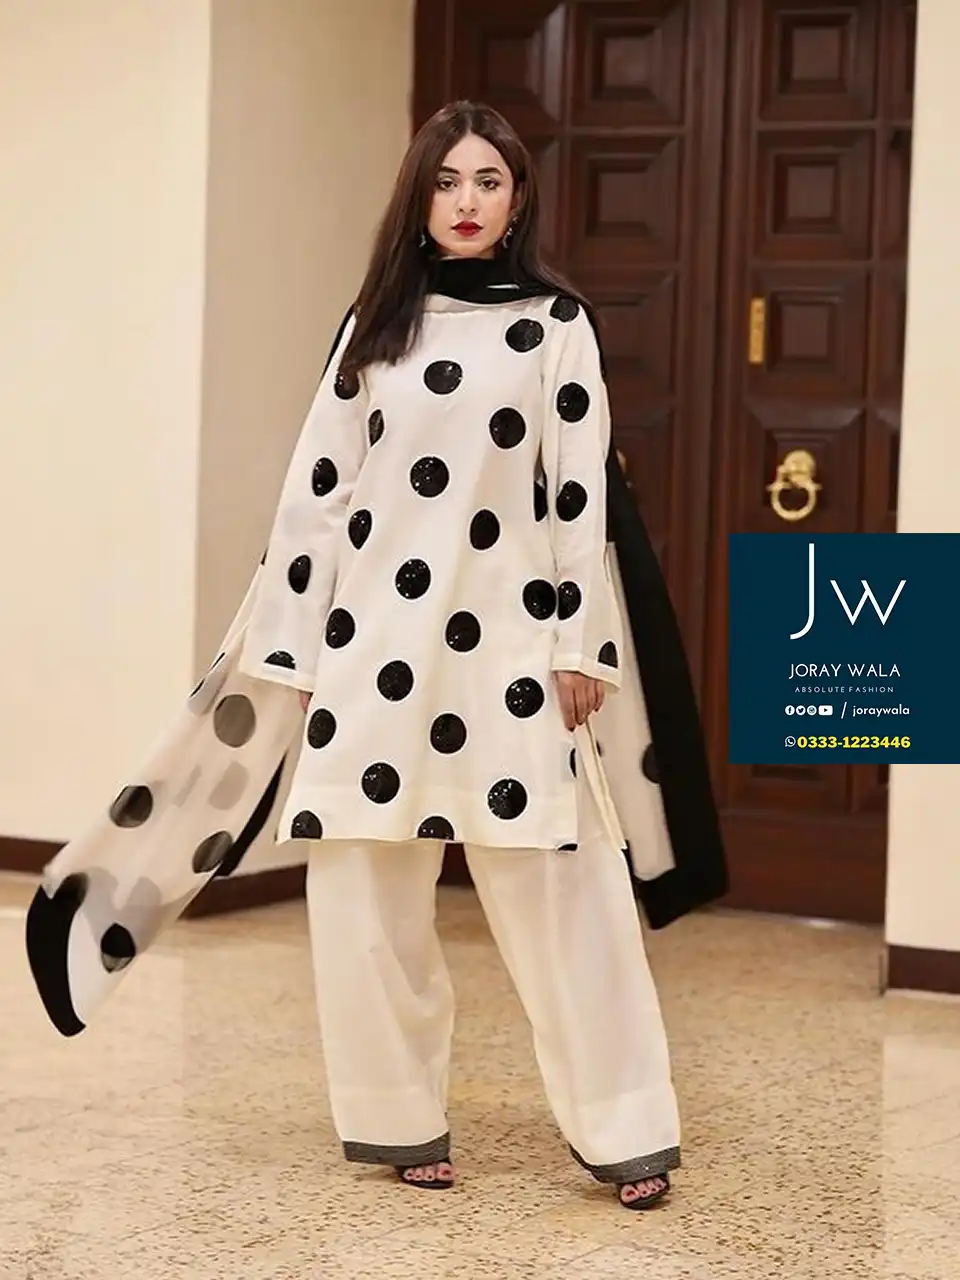 Yumna Zaidi wearing Zara shahjhan trending 3 piece suit in black and white color, master copy available at joraywala